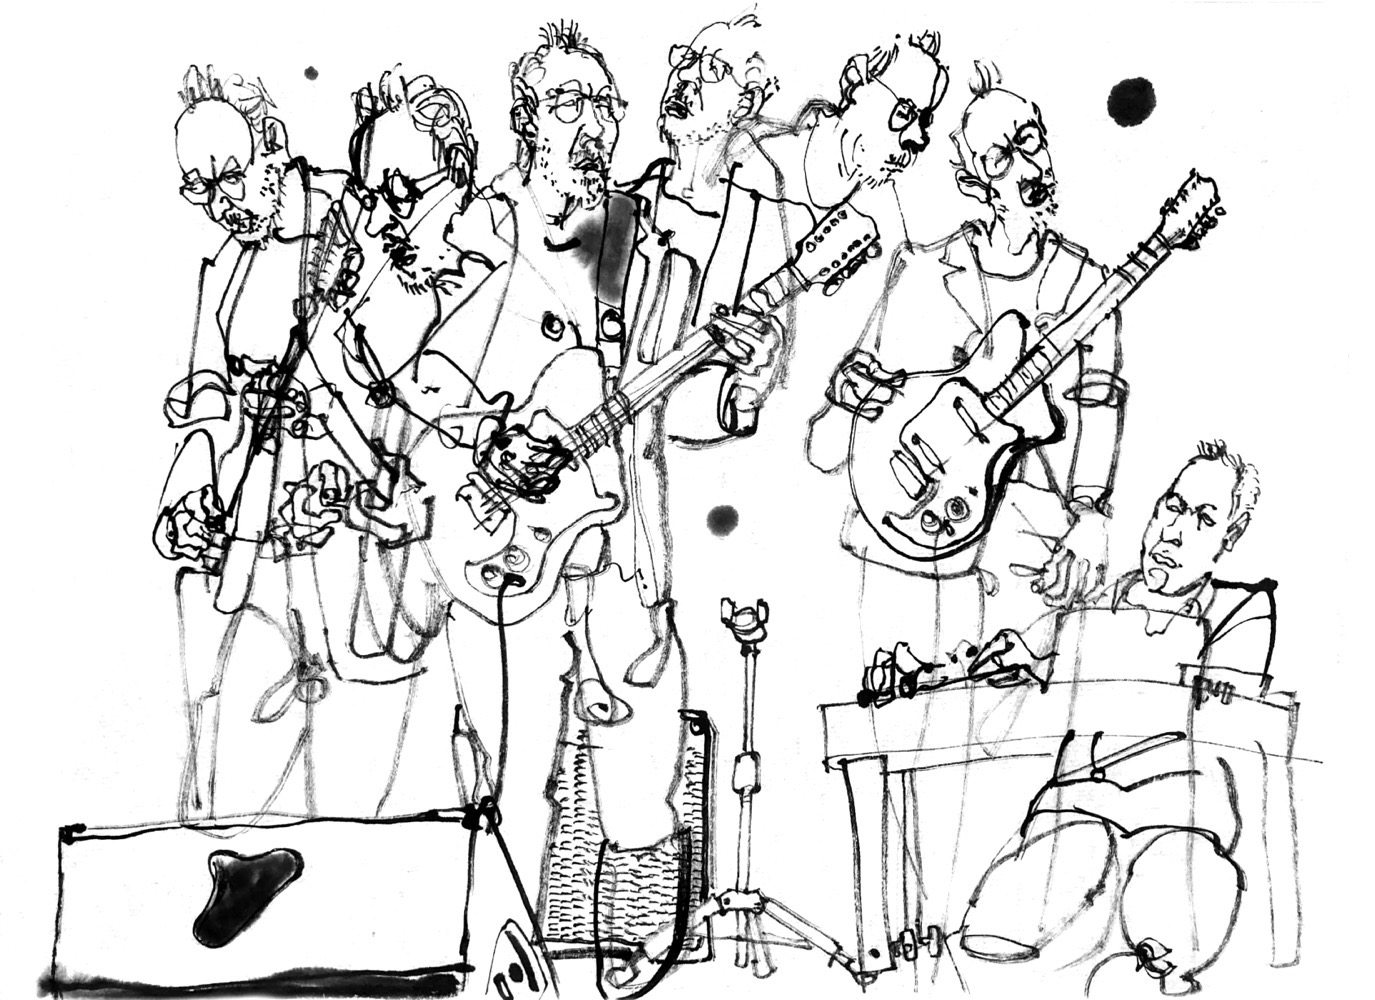 Ink drawing of a guitarist, depicted six times, and another man at a desk with laptop and more electronic devices.